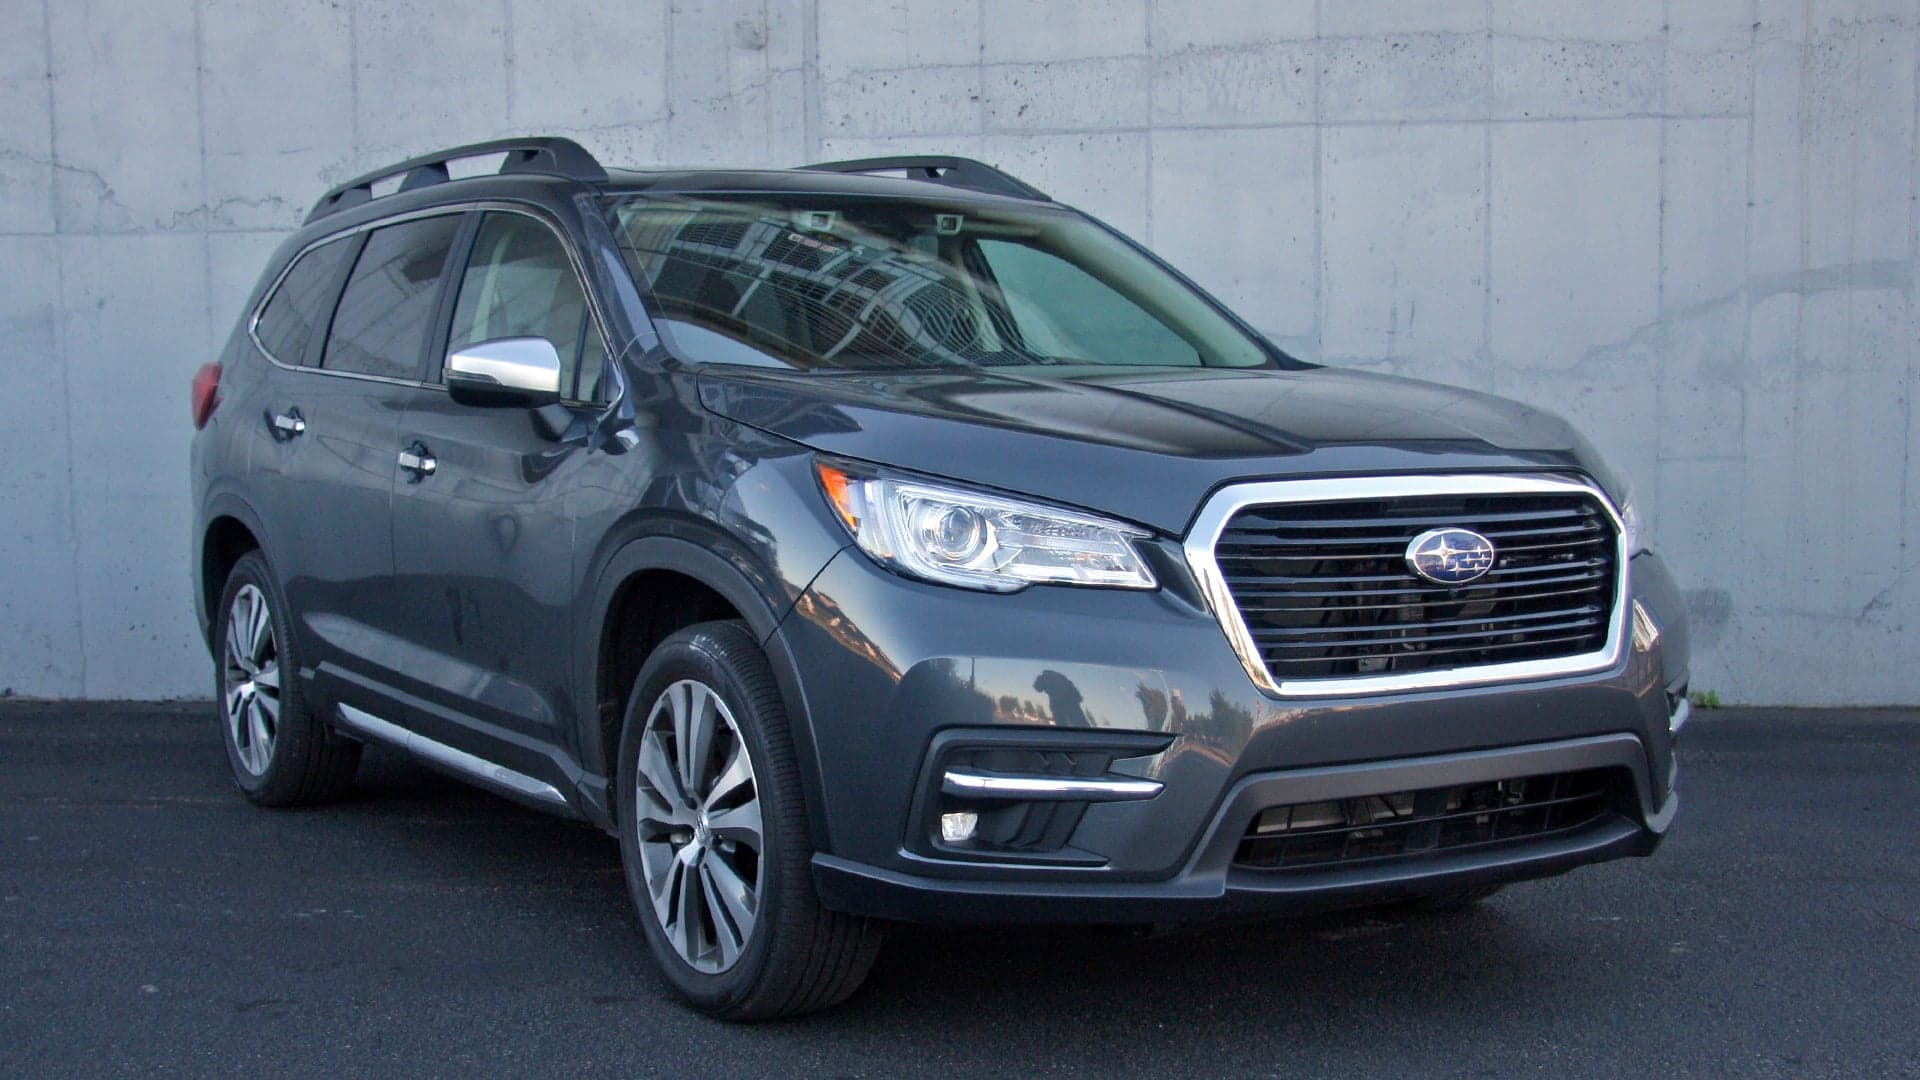 2019 Subaru Ascent New Dad Review: A Secret Minivan for Parents Who Can’t Admit They’re Not Cool